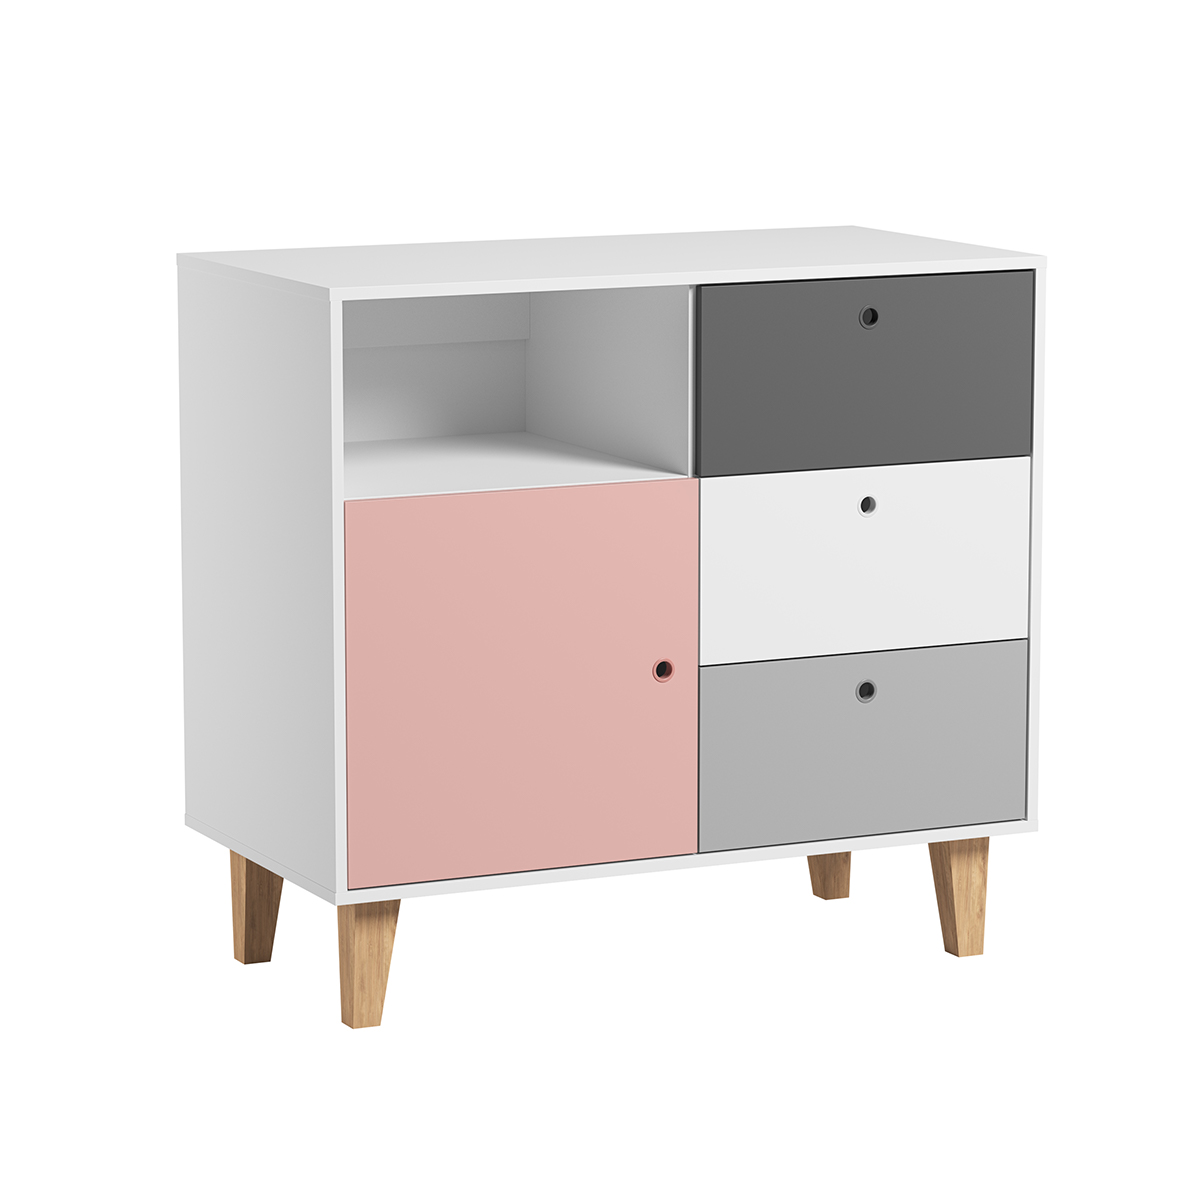 vox_concept_commode_rose_gris